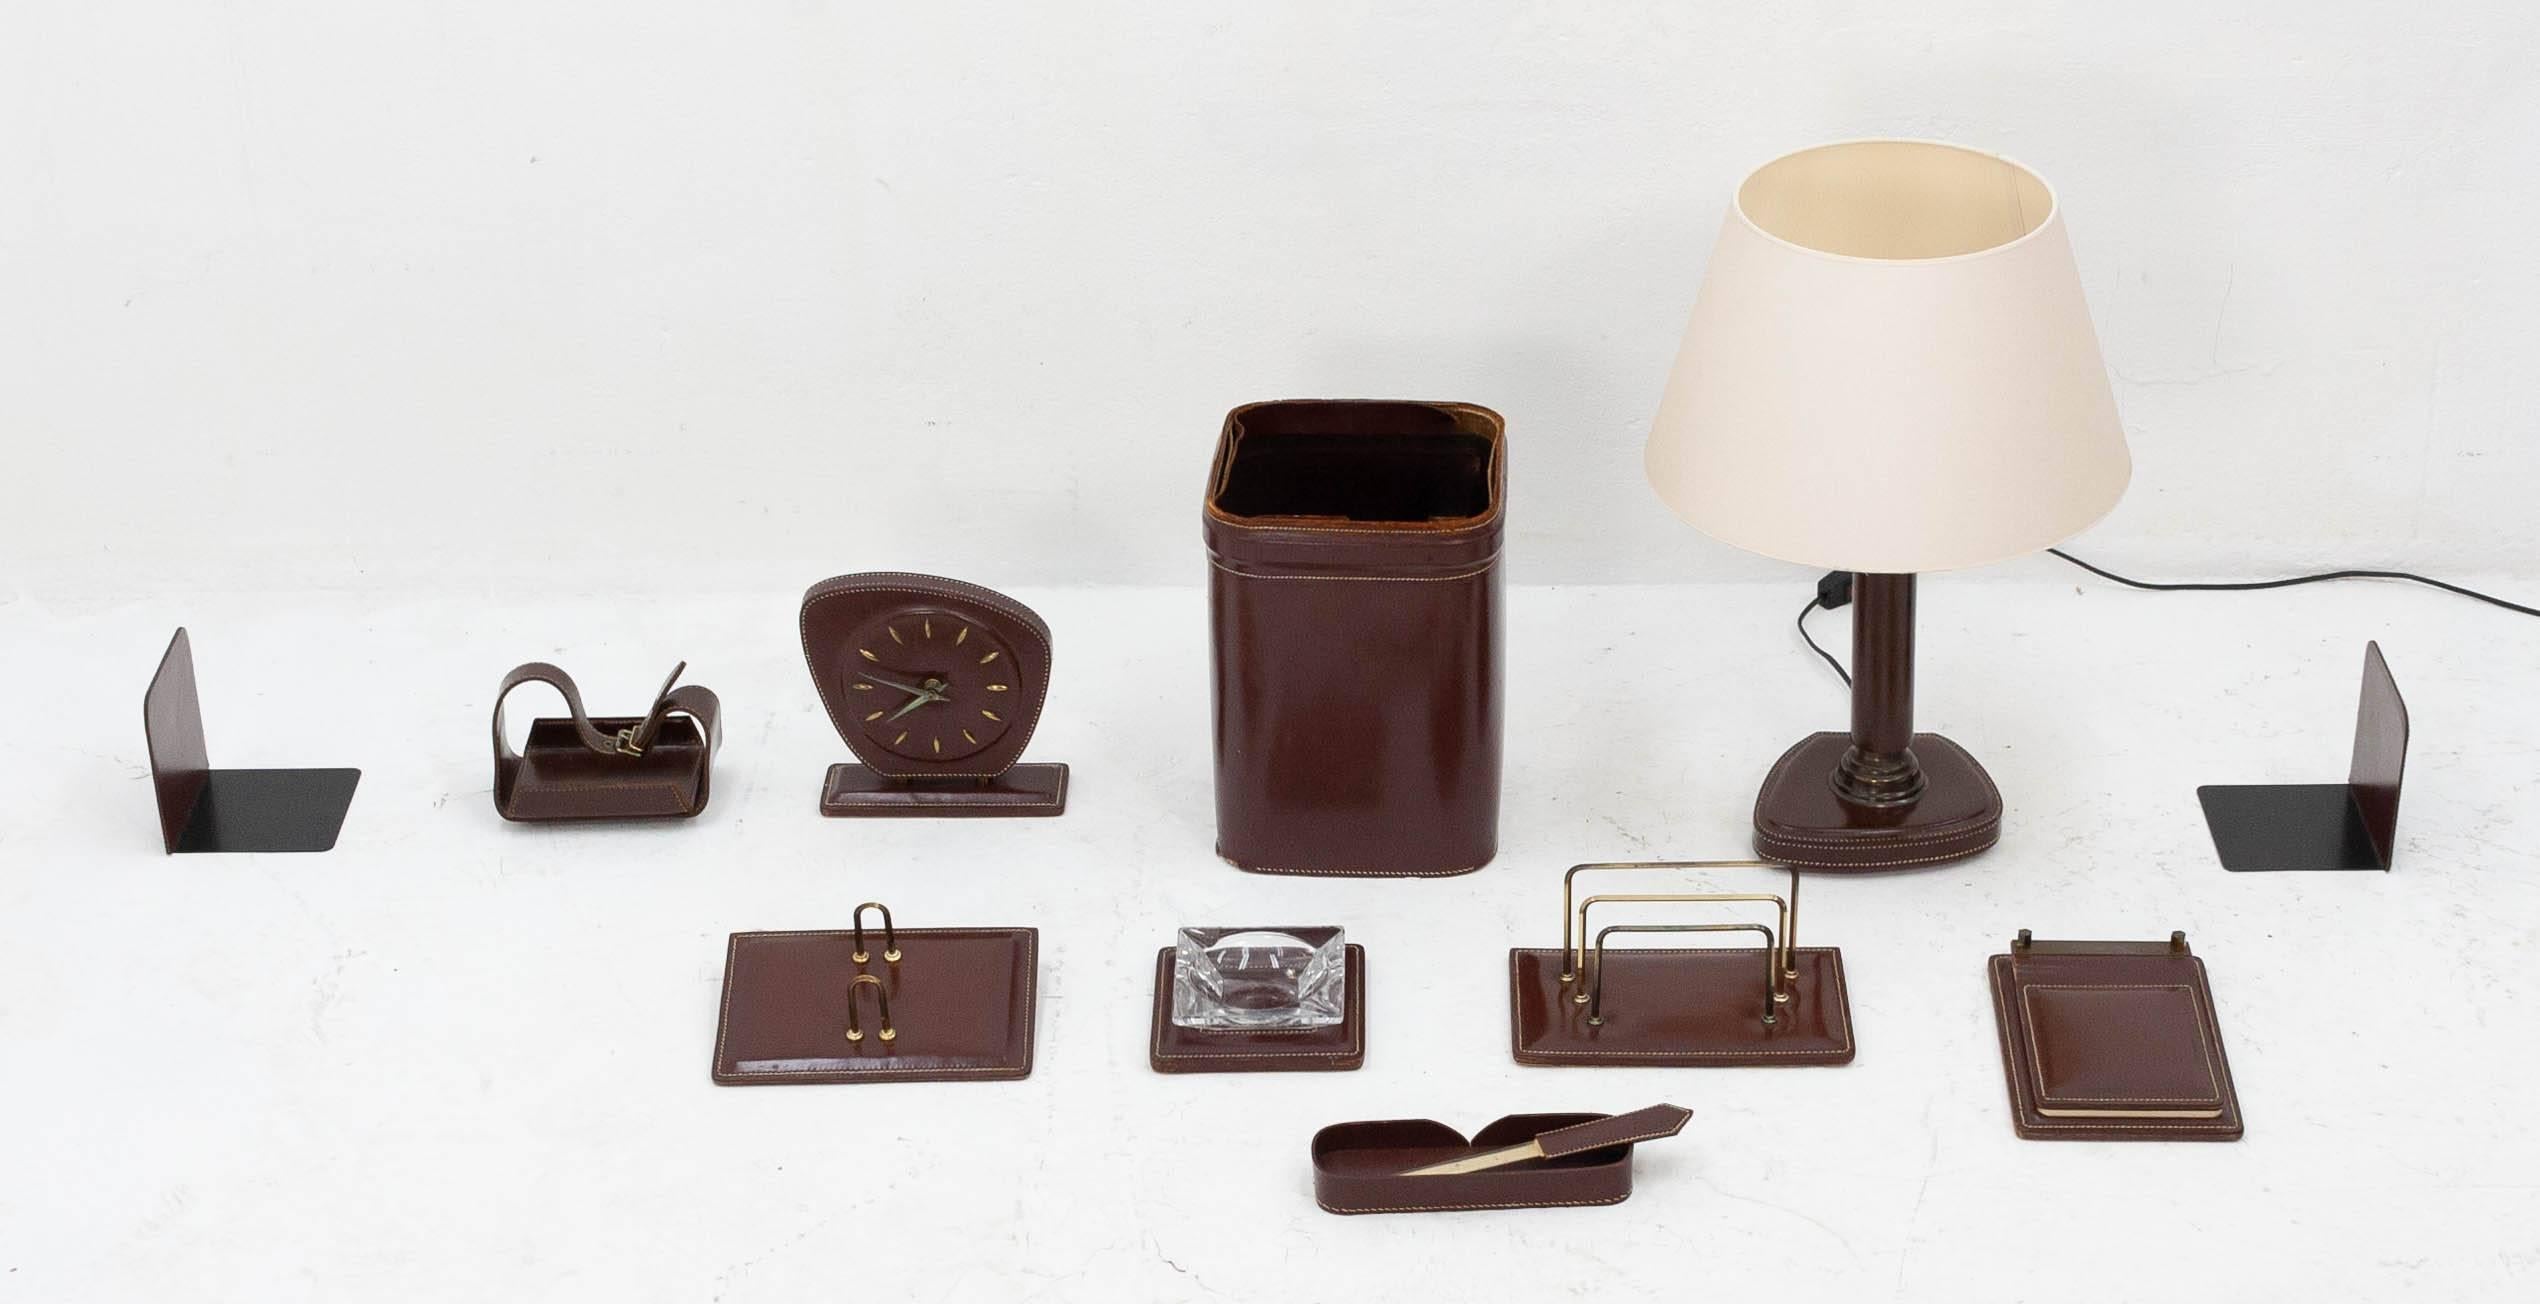 Fabulous large stitched brown leather desk set, French, 1960s. This set consists of the following eleven items:

- Desk clock (in good working order)
- Two bookends
- Letter holder
- Business card holder
- Desk lamp with lampshade
- Glass